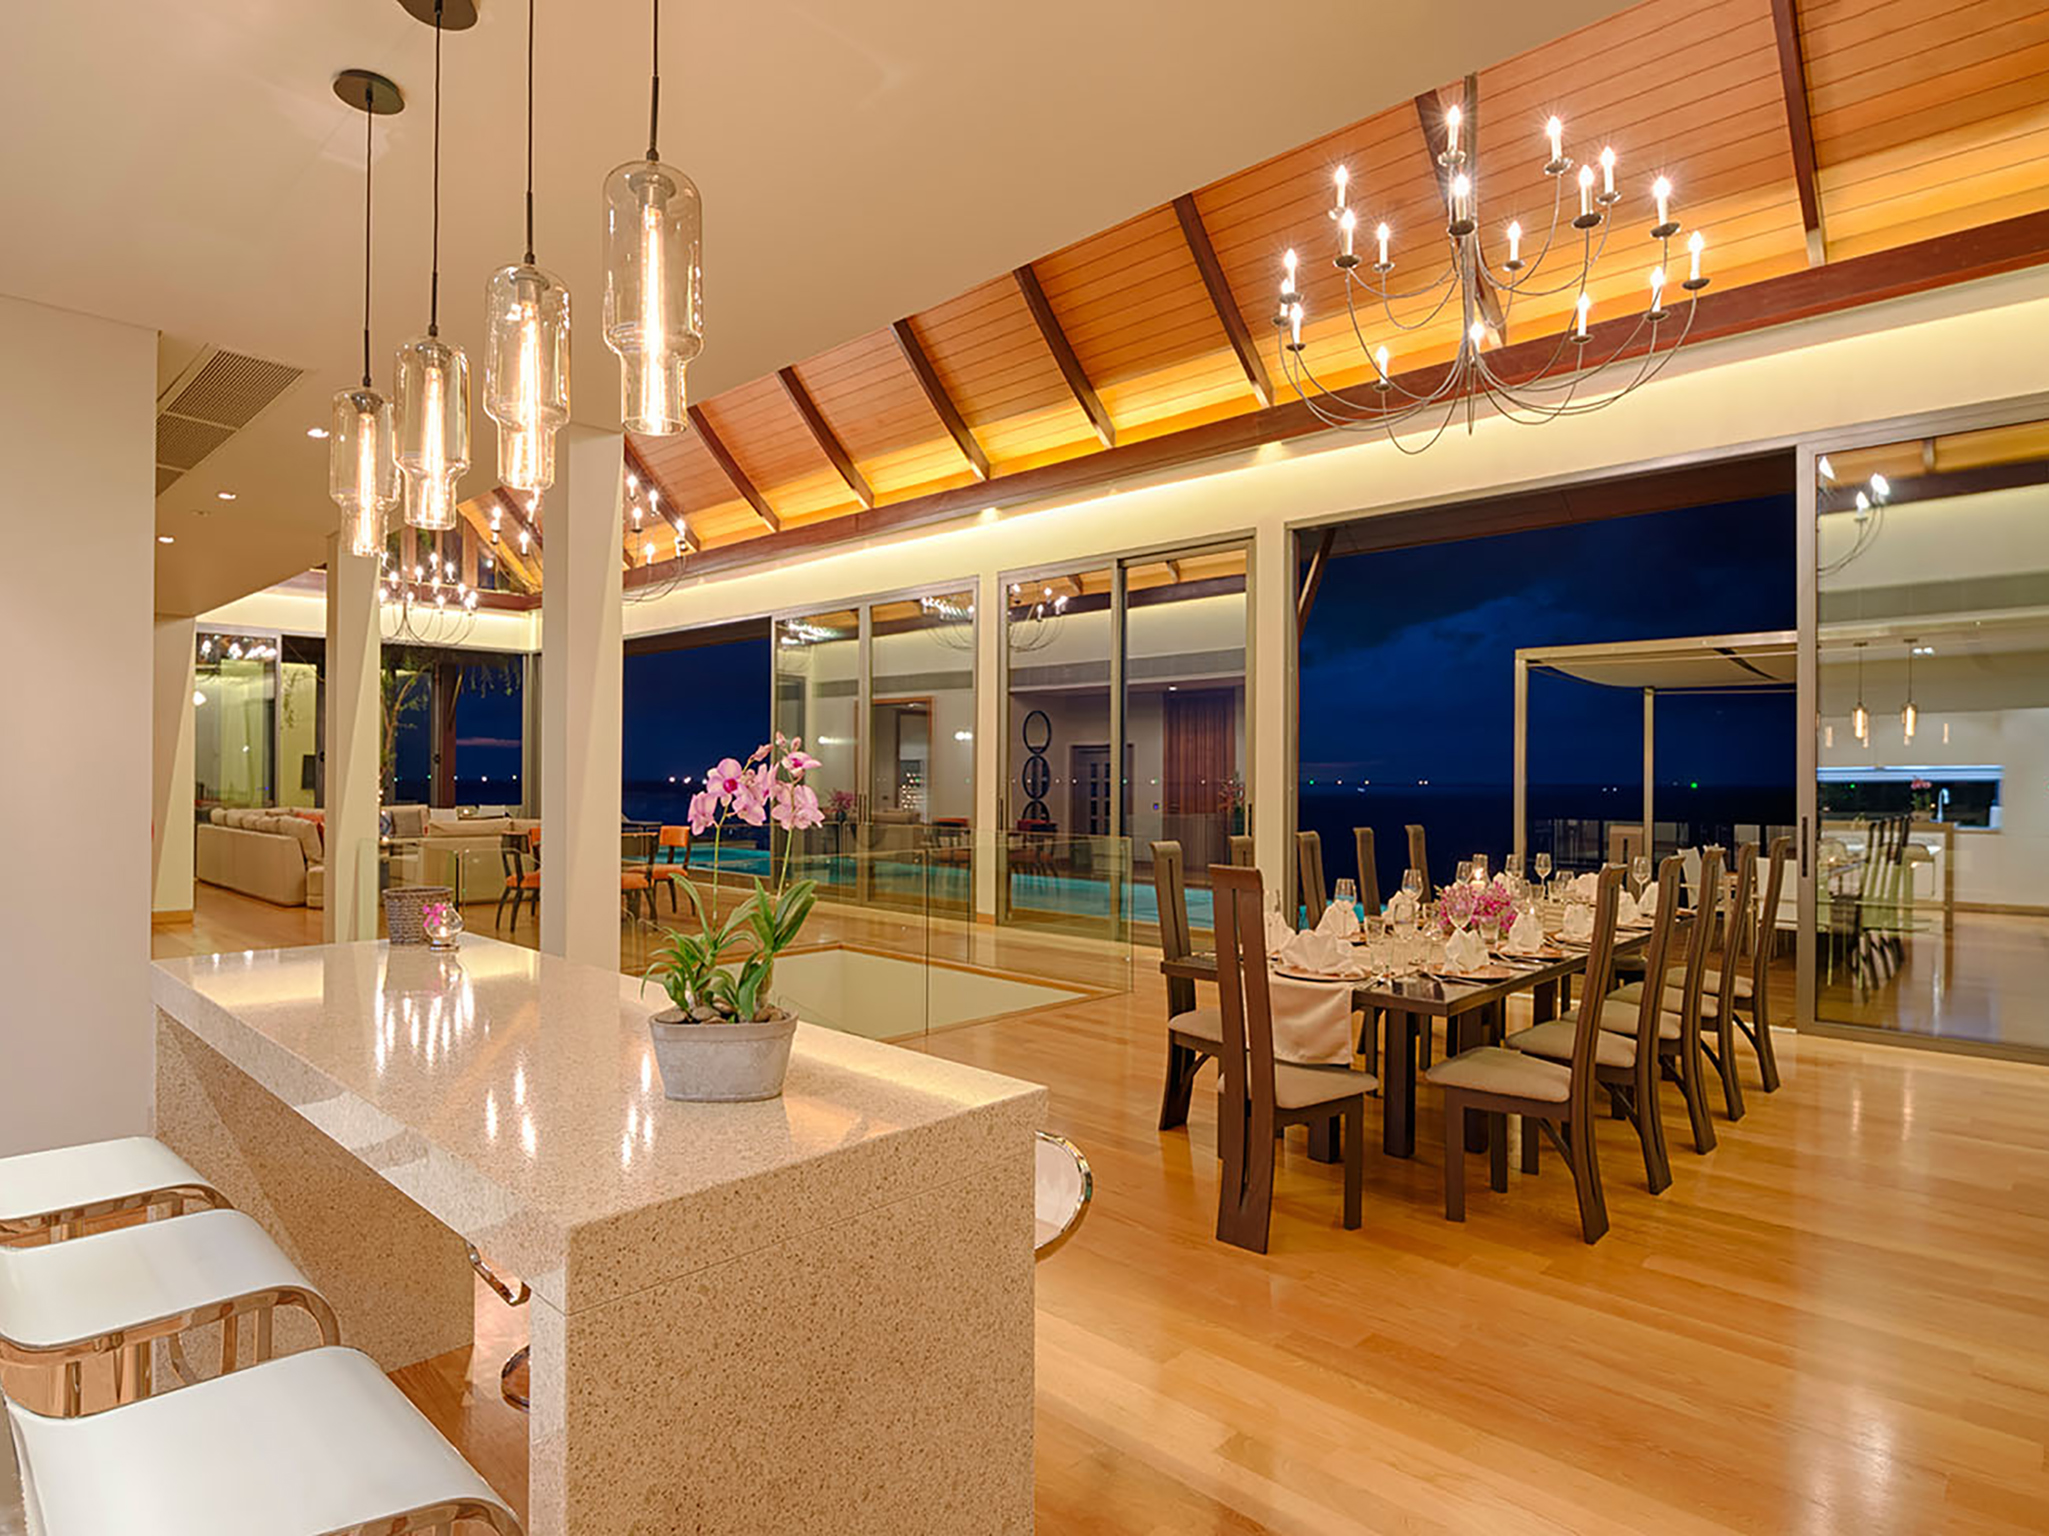 Villa Haleana - Living and dining spaces